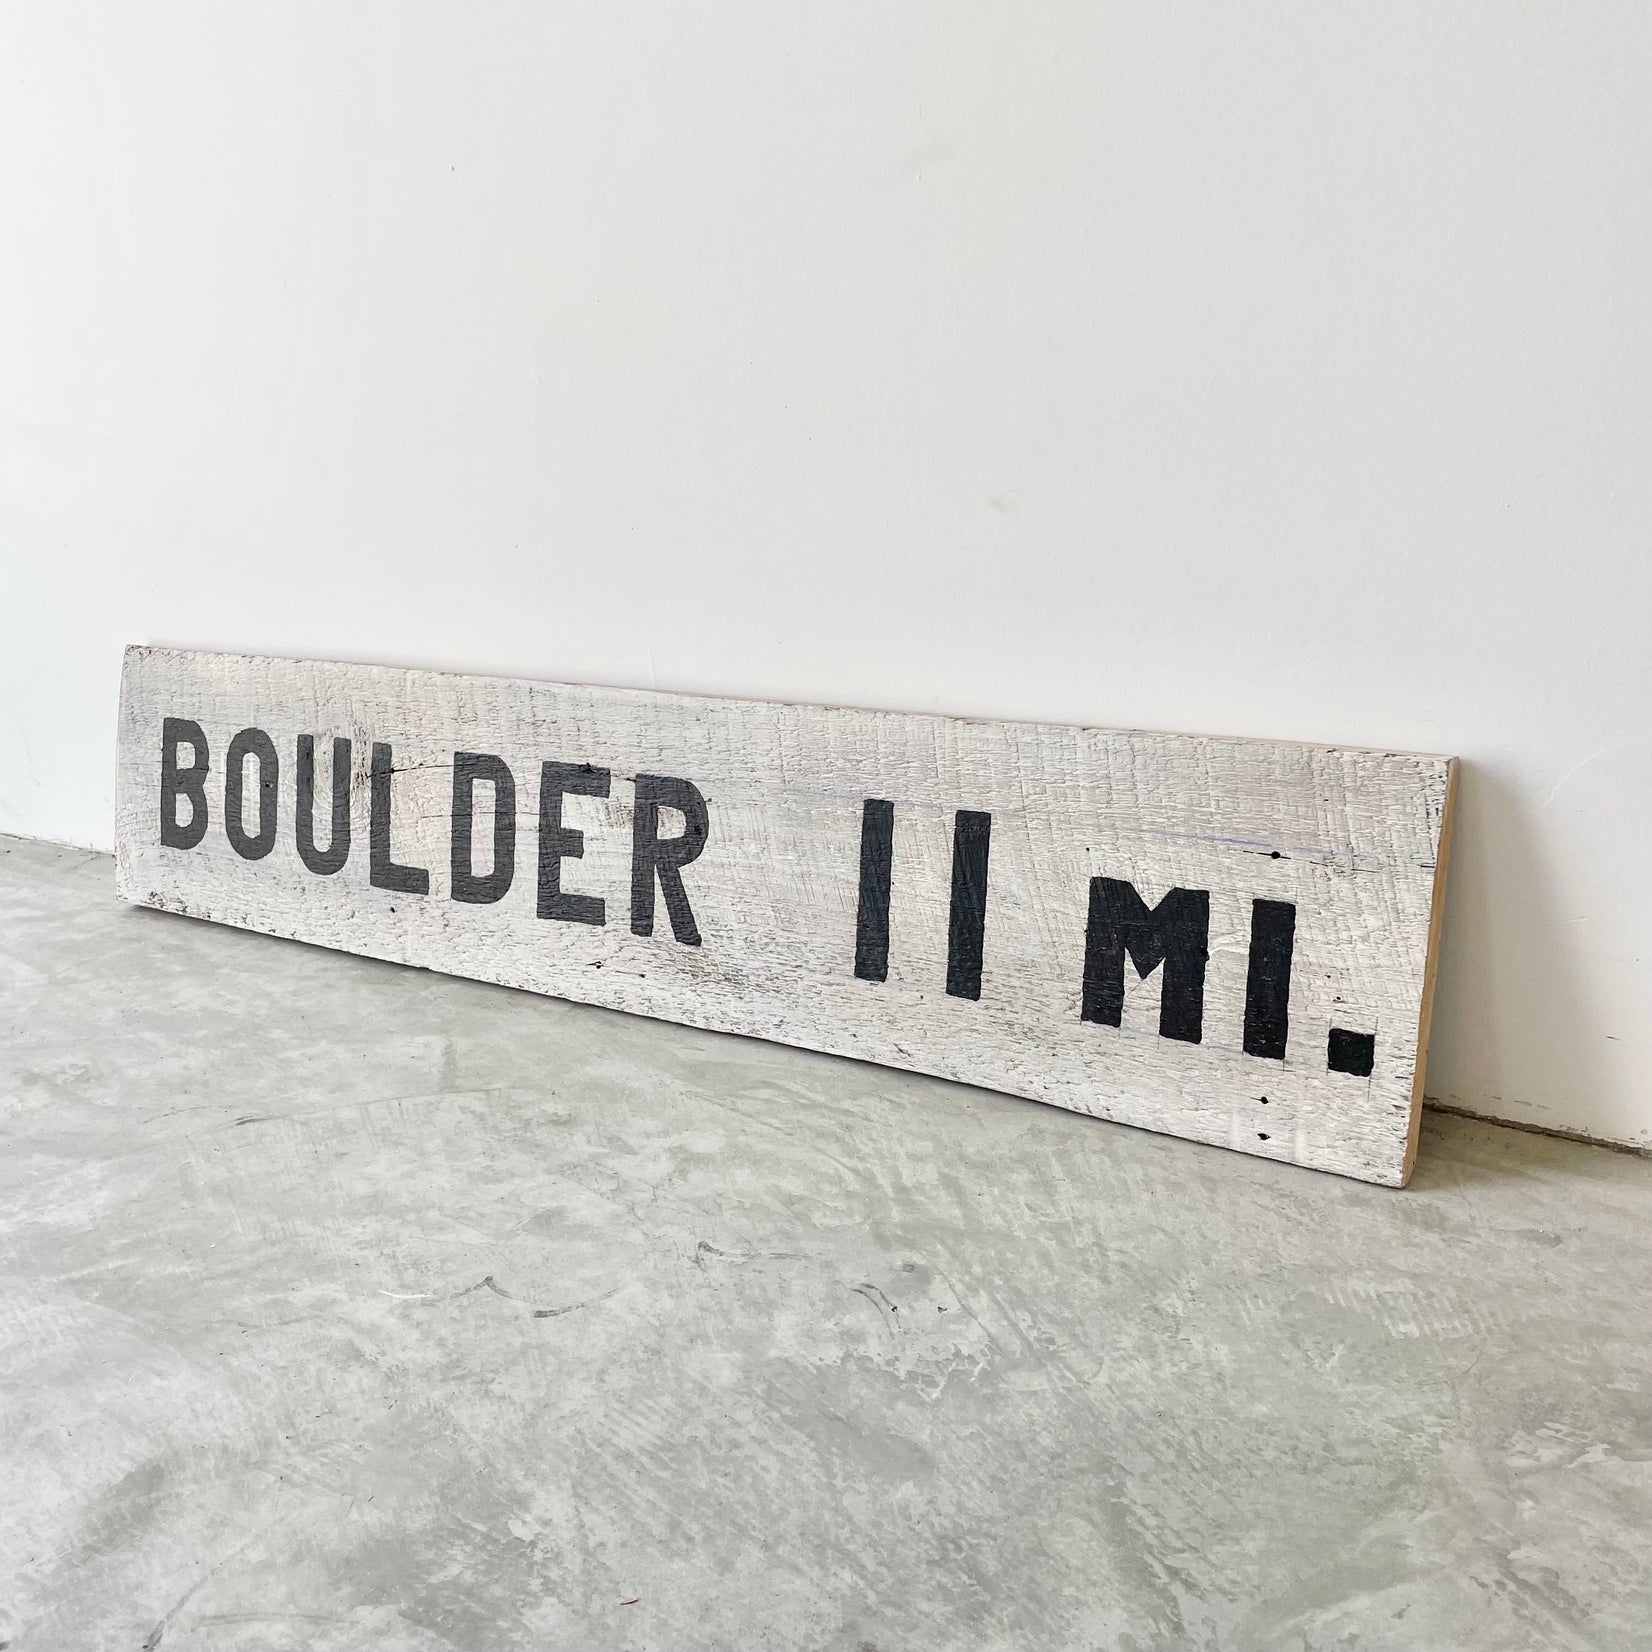 'Boulder' Colorado Hand Painted Wood Road Sign